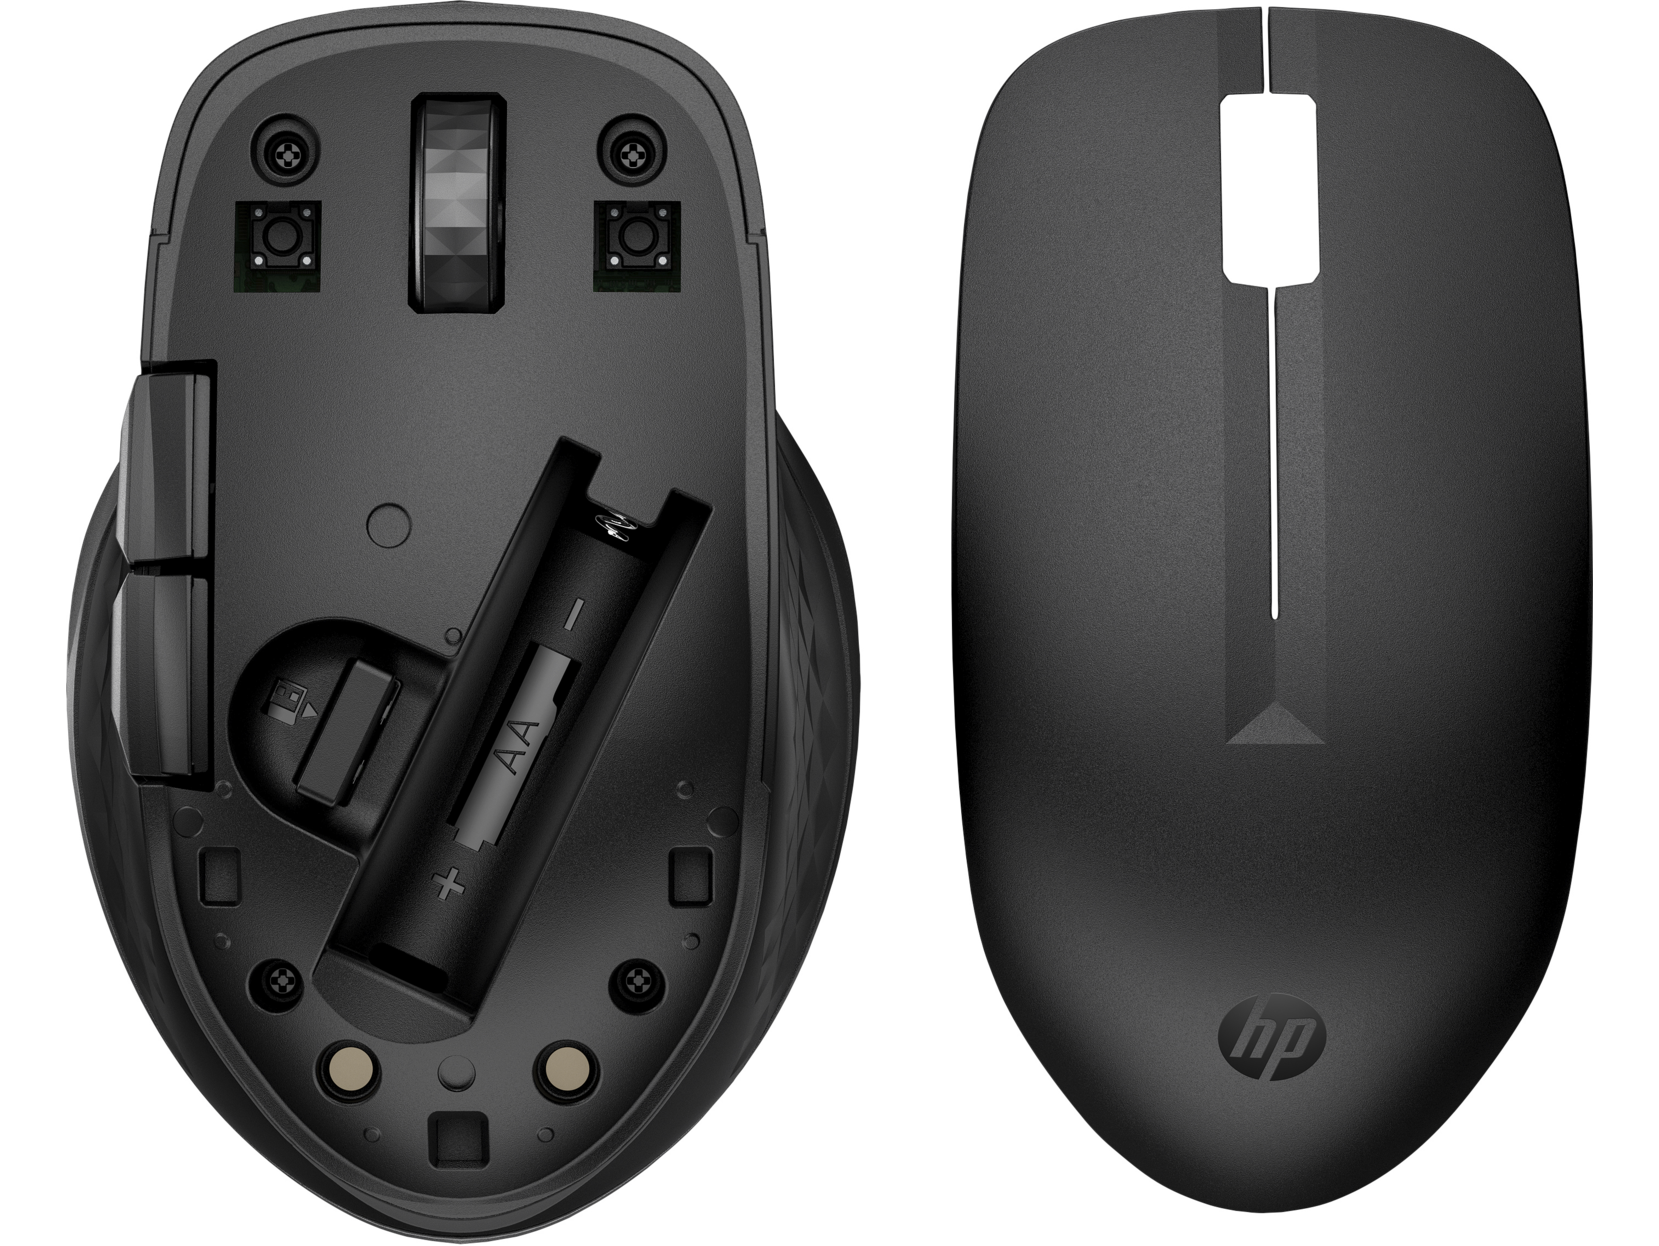 HP 435 Multi-Device Wireless Mouse for business - image 2 of 7